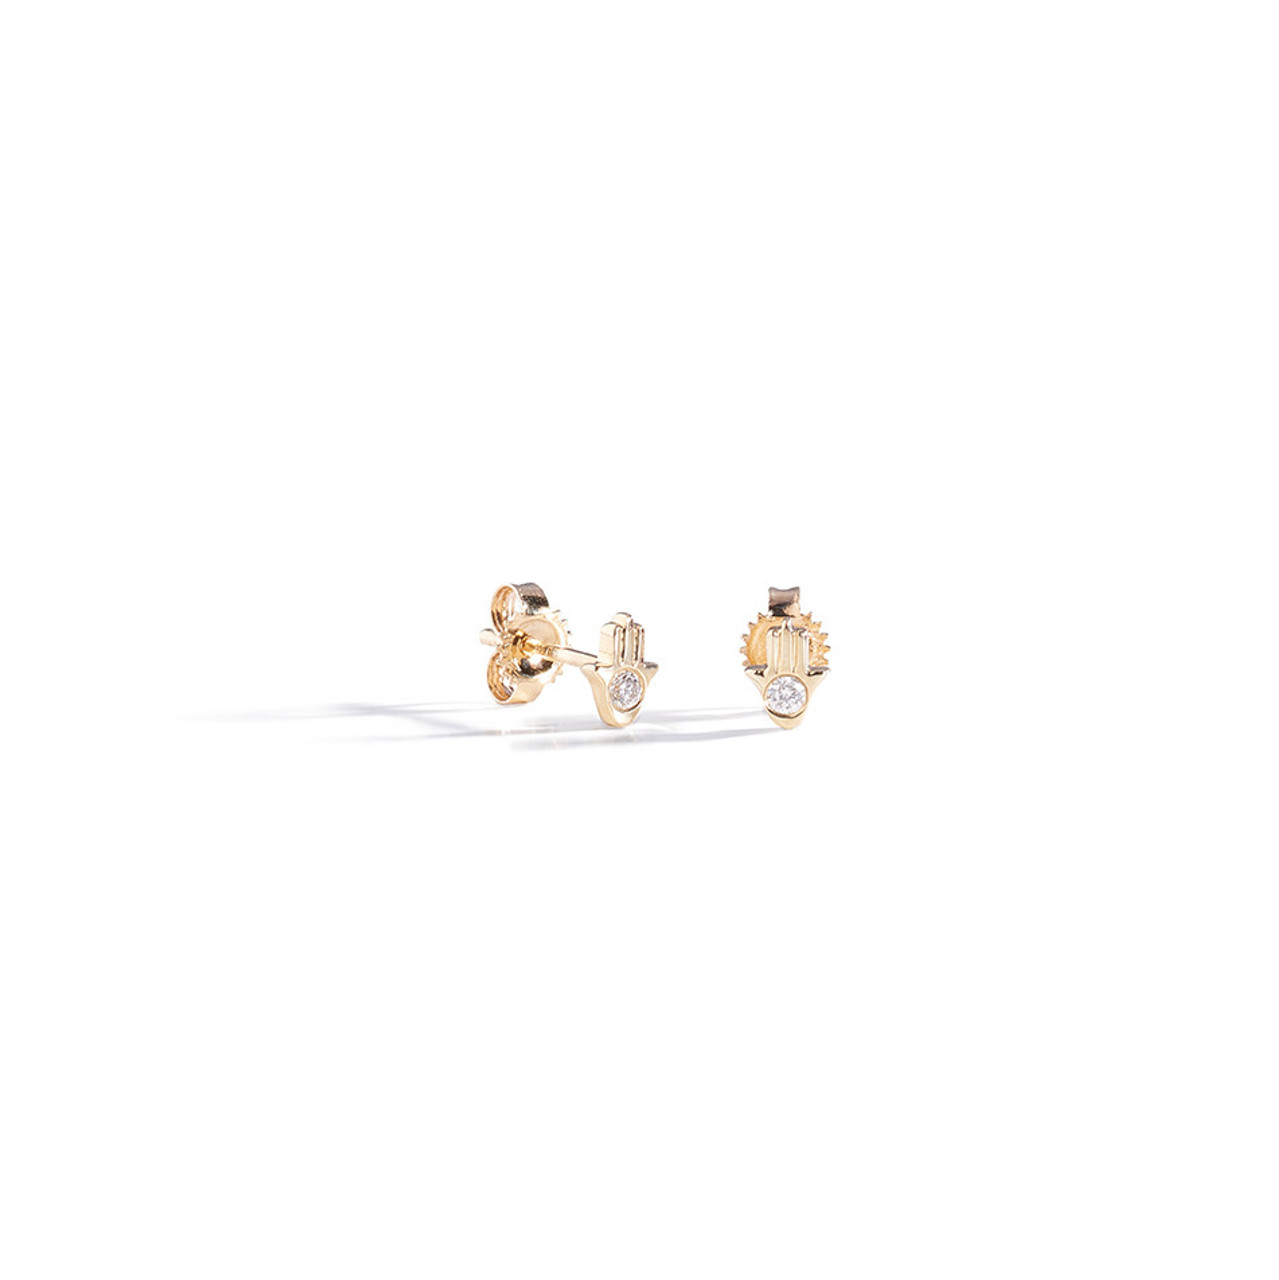 Mini Medallion Earring Studs in Yellow, Rose or White Gold